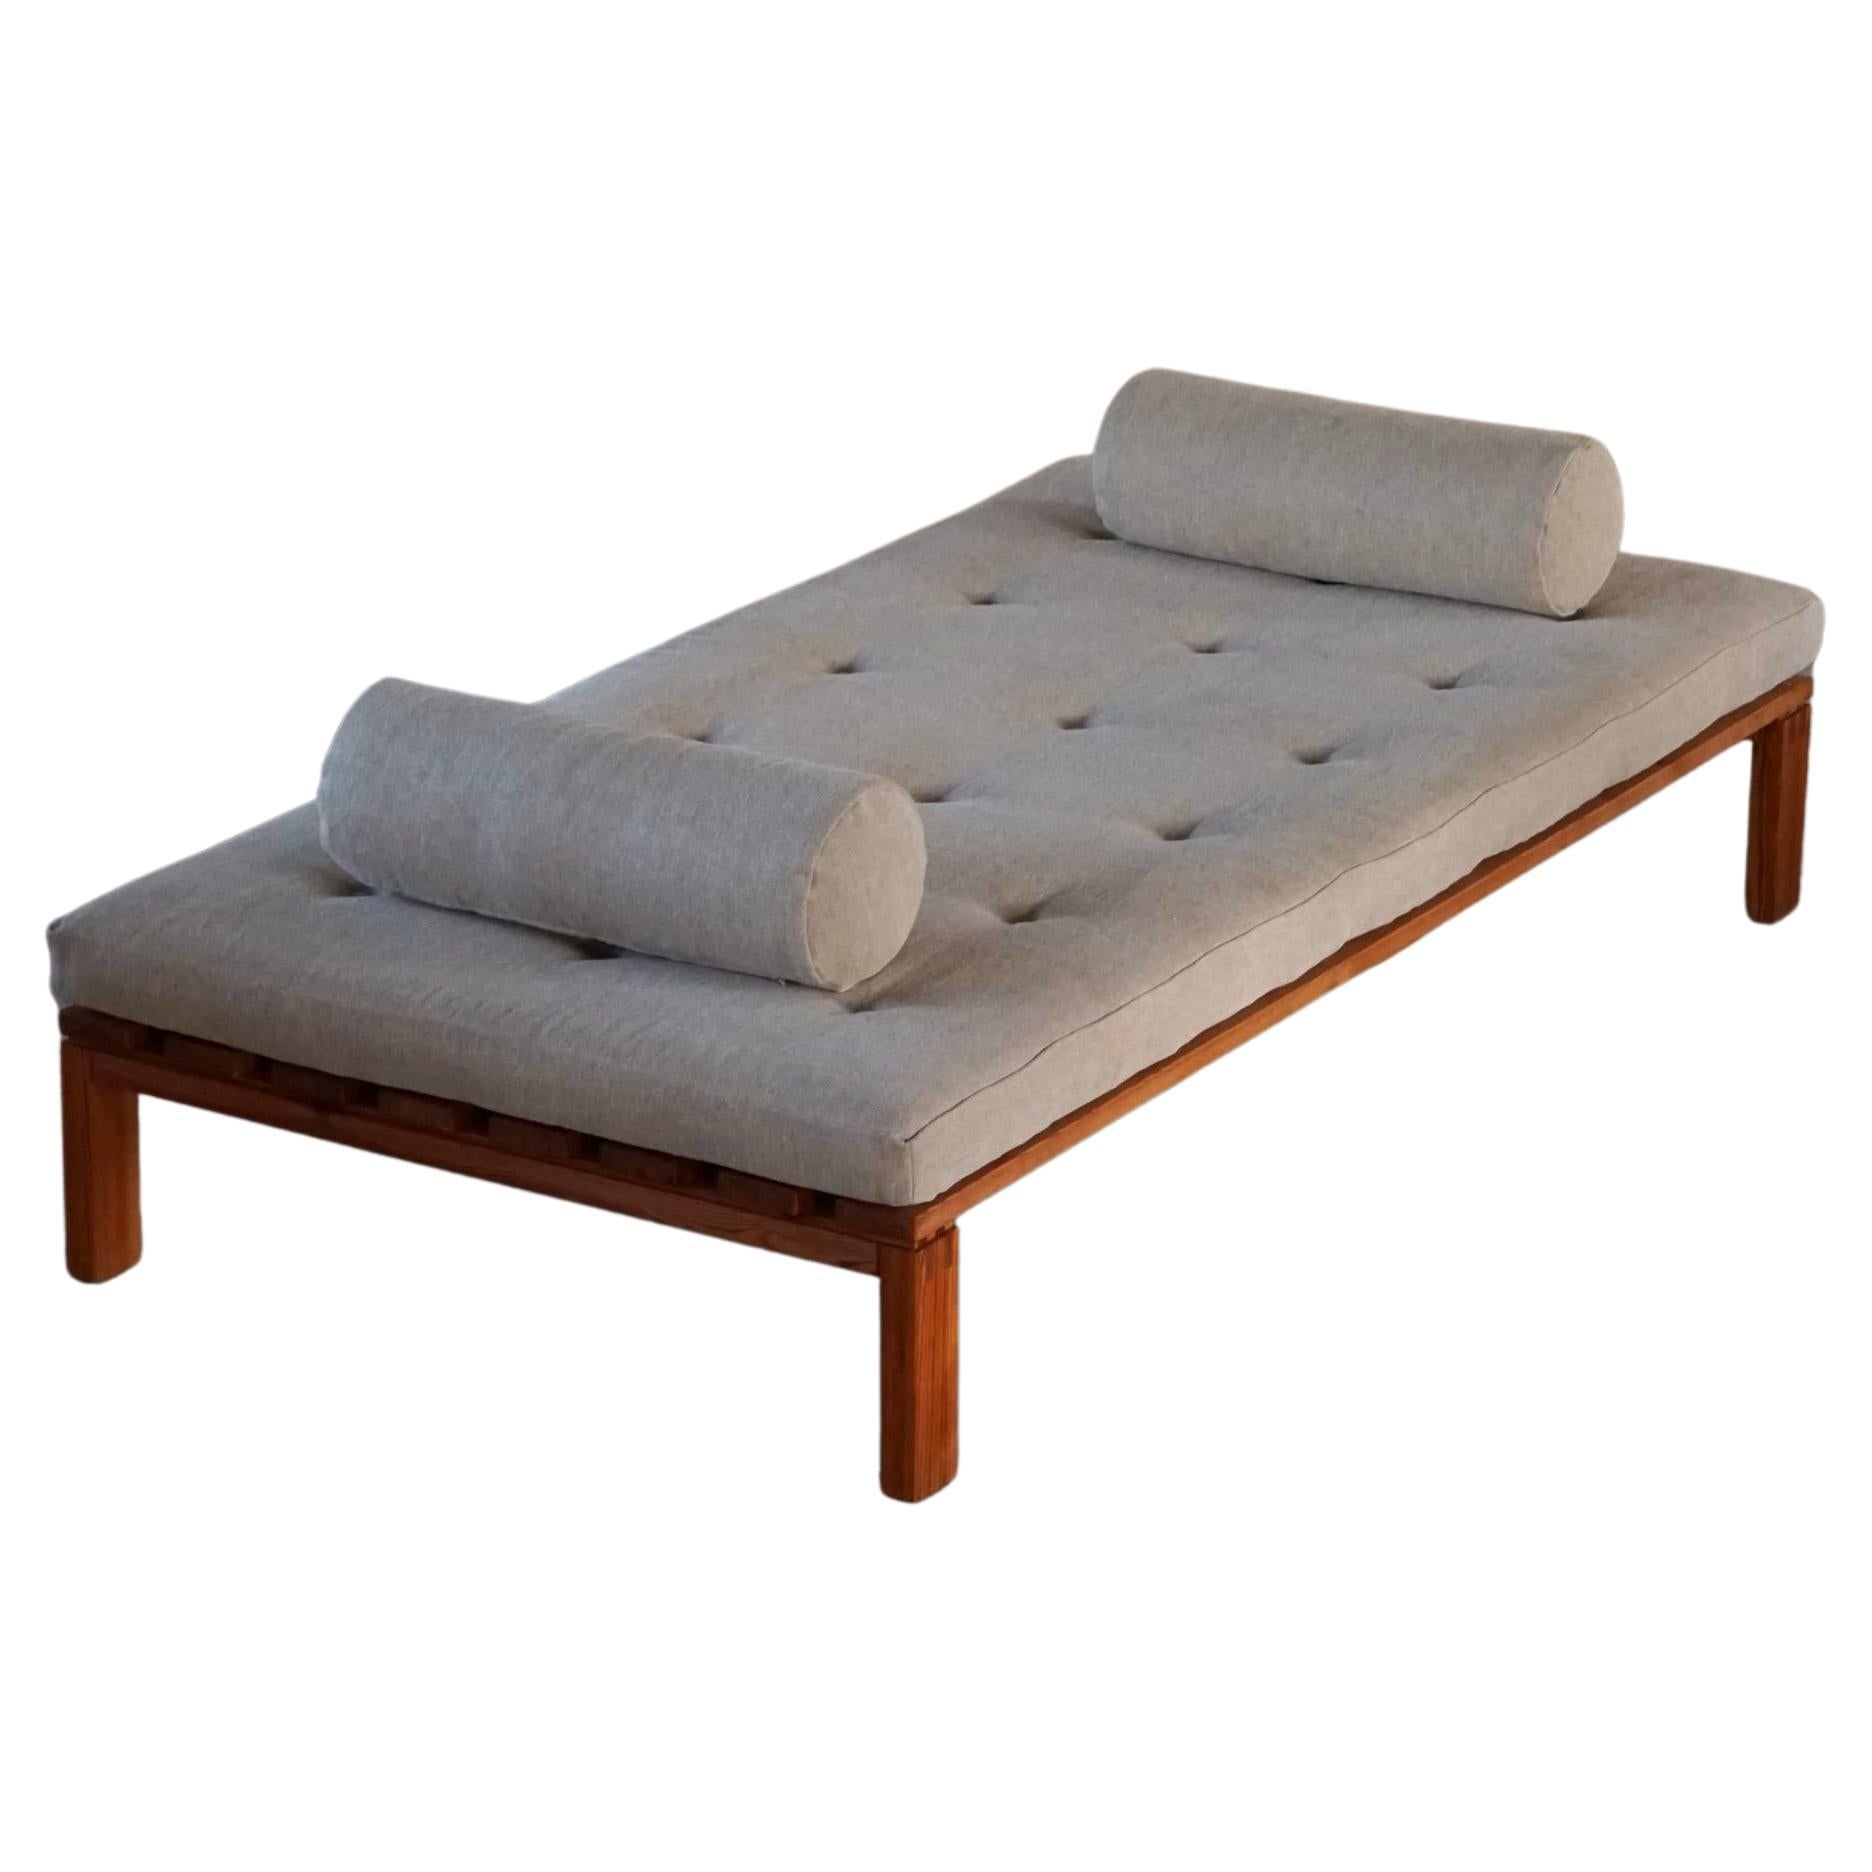 Nyt I Bo Daybed, Made in Pine, Reupholstered, Danish Mid-Century Modern, 1970s